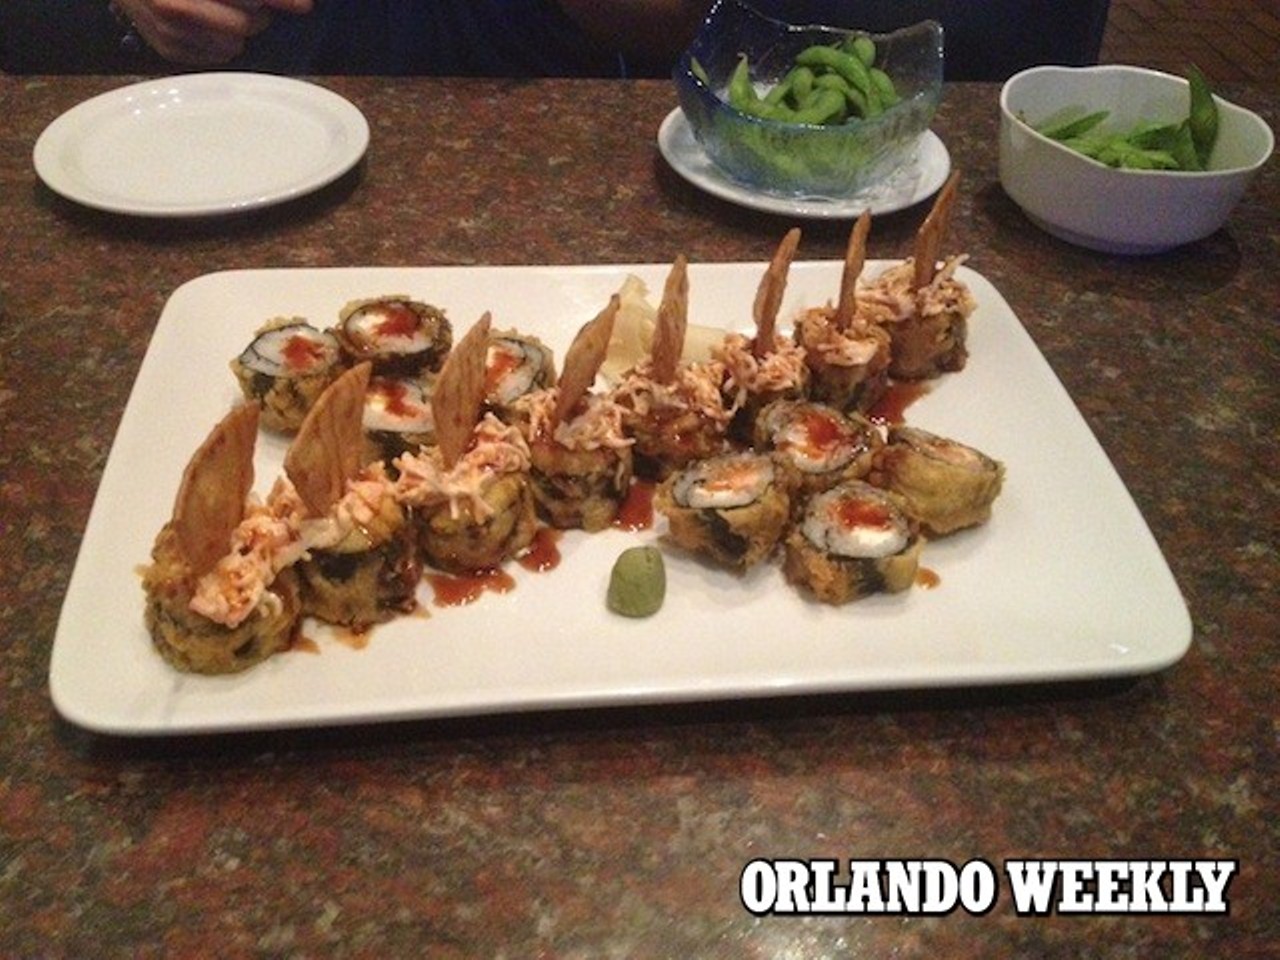 Or go out for a fabulous meal? It is Restaurant Week, after all -- we stopped by Avenue Sushi to try out their Restaurant Week menu.